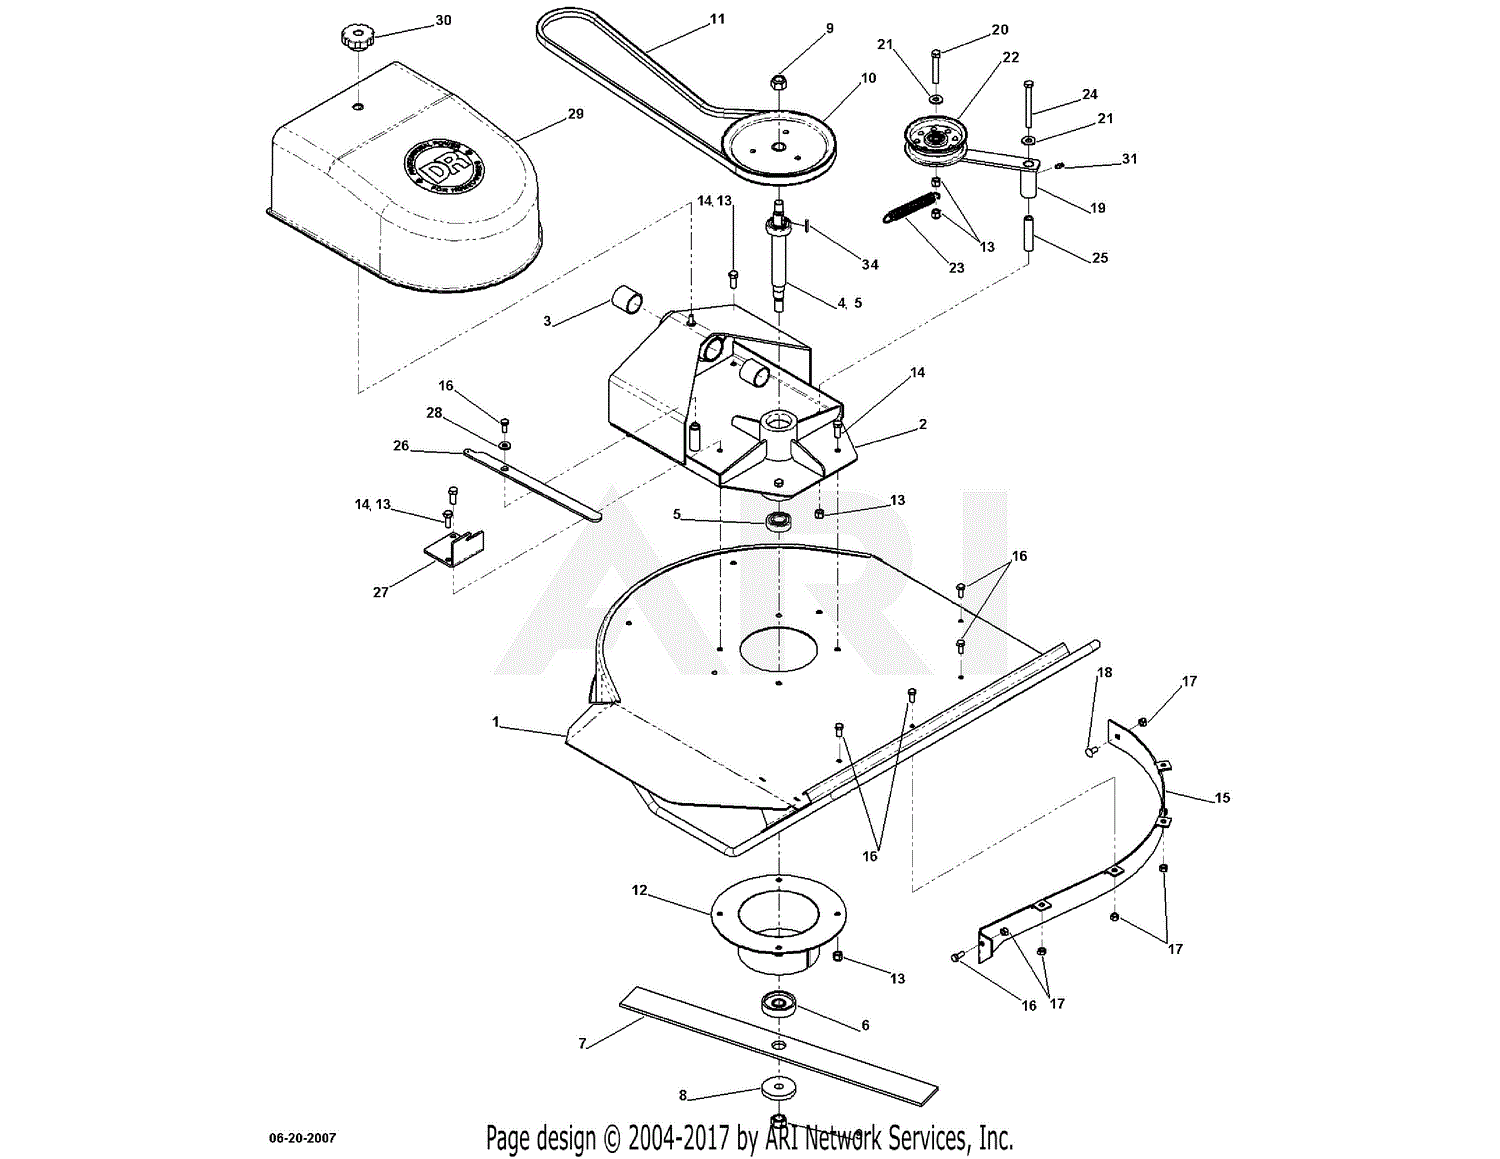 DR Power AT3-Walk Behind Mower (Ser# ATM87418 To ATM137008) Parts Diagrams